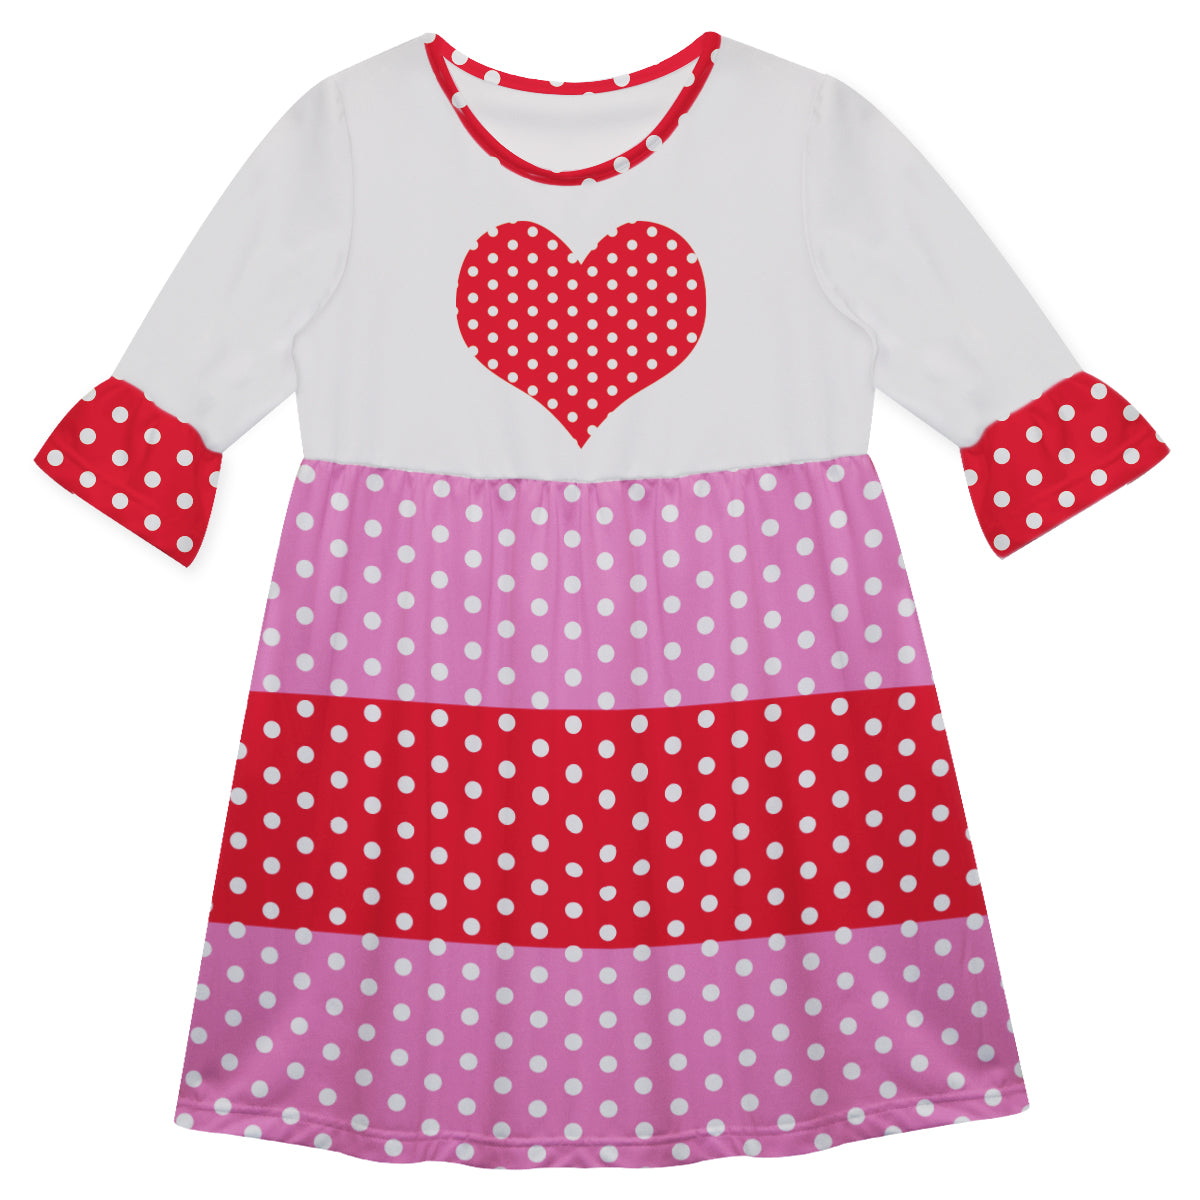 Heart Pink White and Red Polka Dots Gingham Amy Dress 3/4 Sleeve